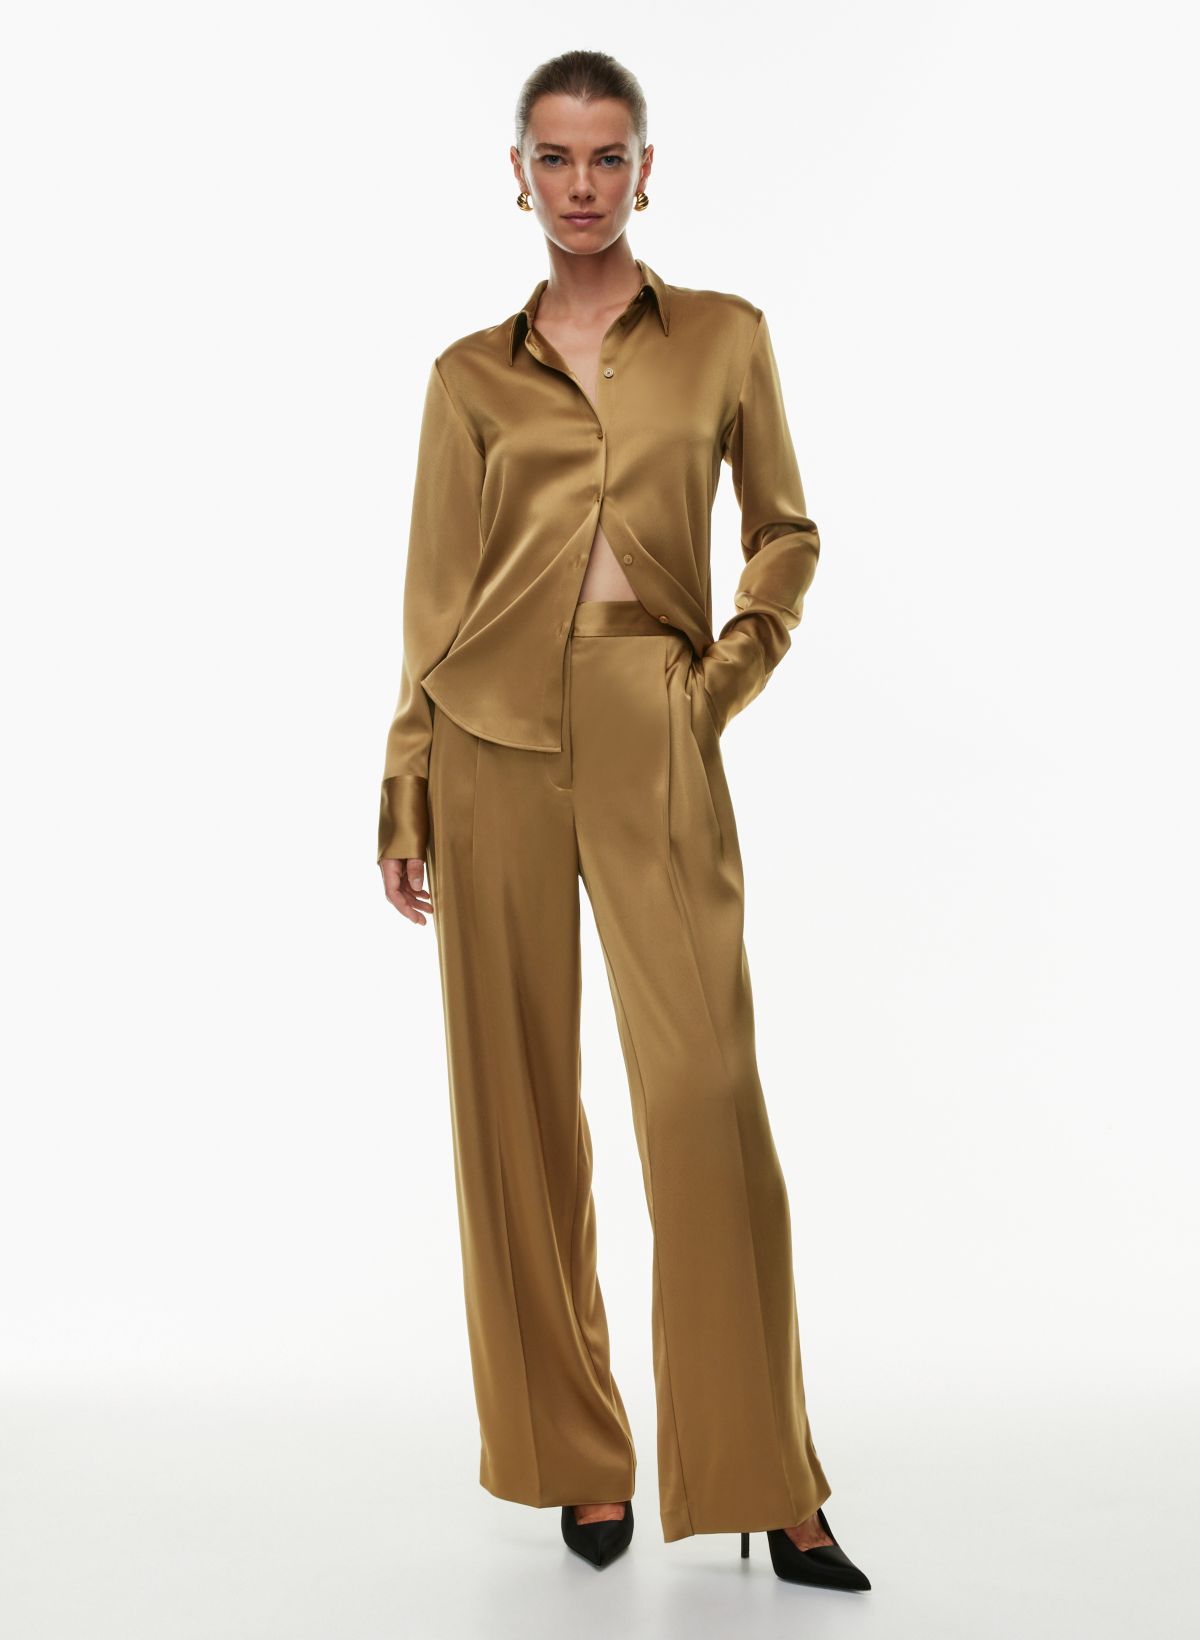 Satin Tailored Wide Leg Pant curated on LTK